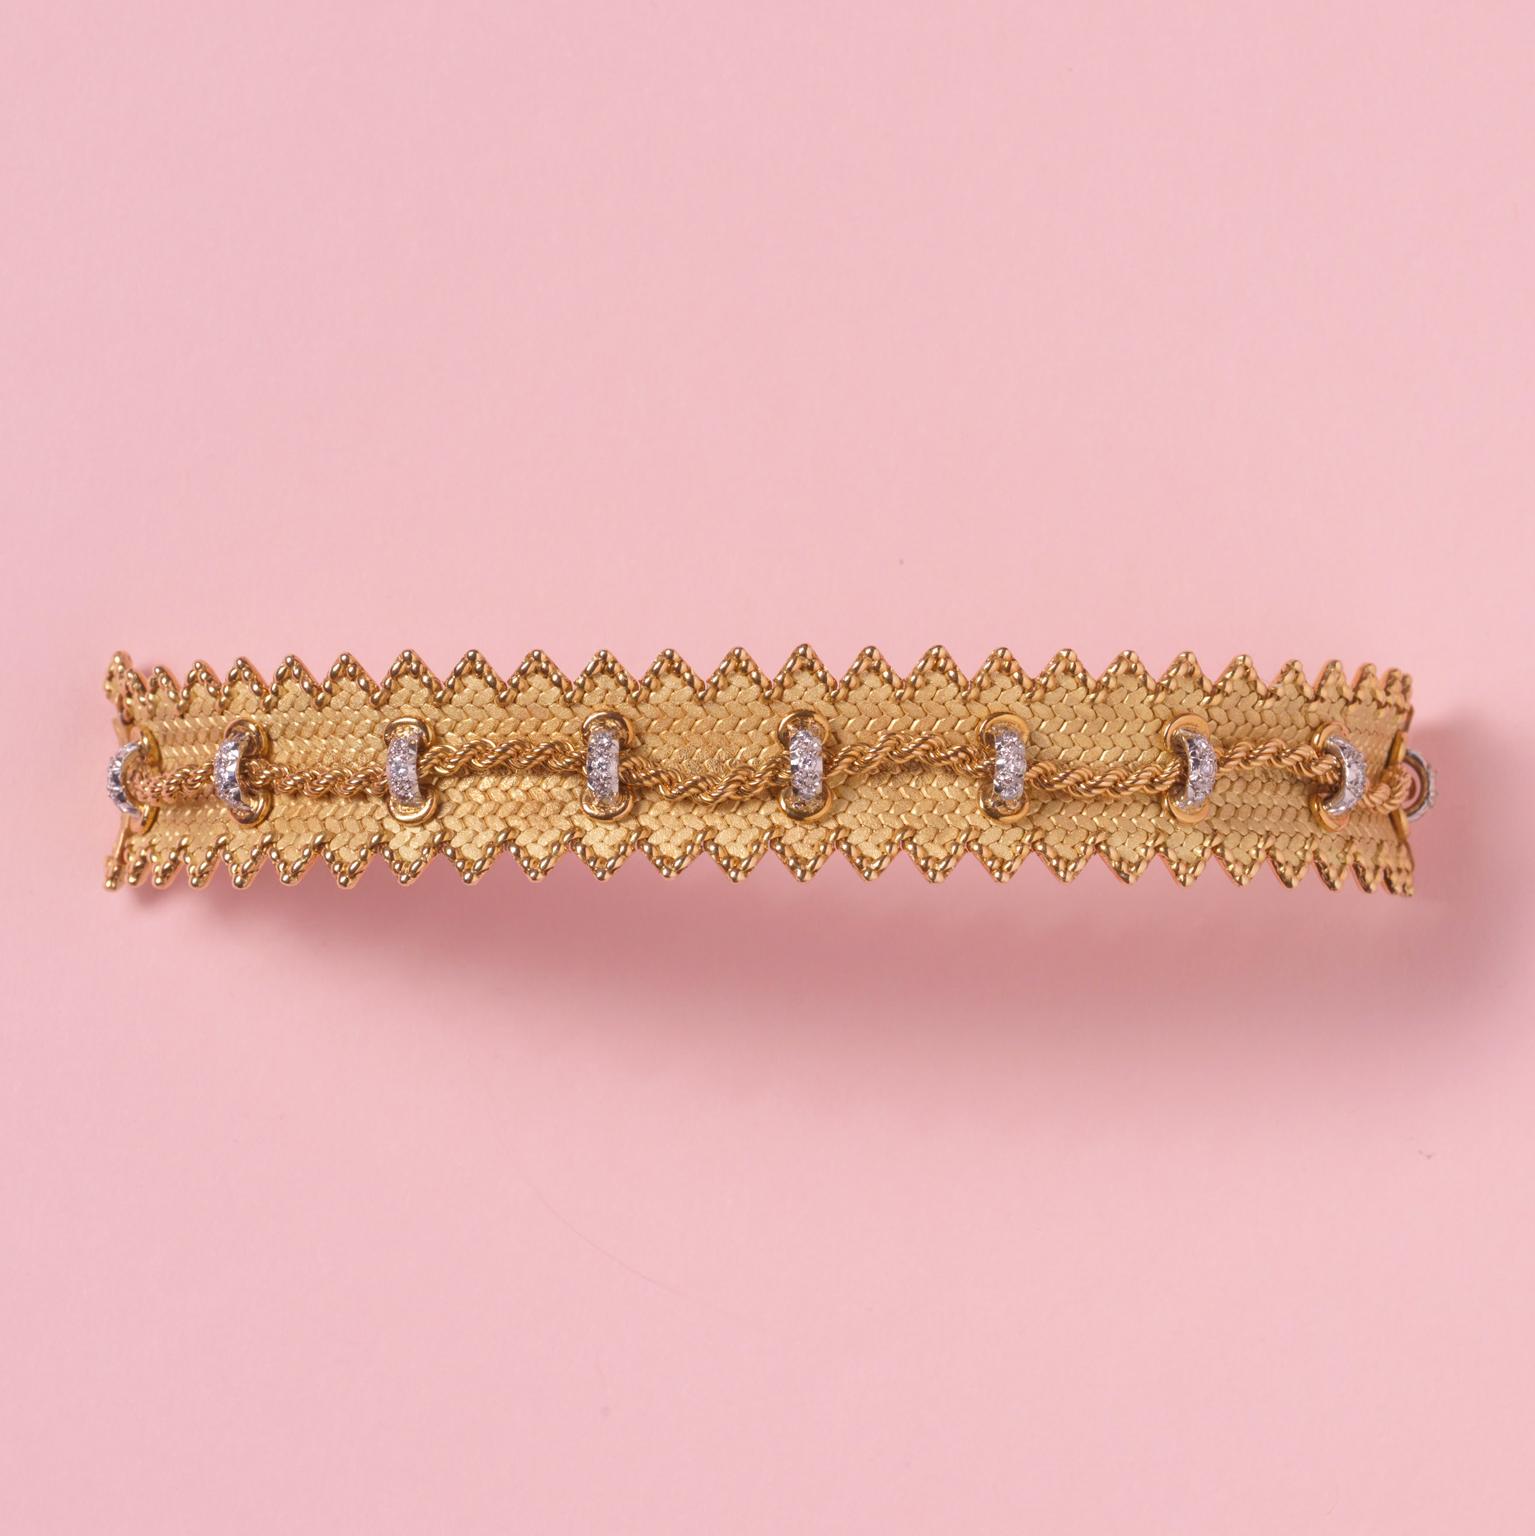 An important wide 18 carat gold bracelet by Georges Lenfant designed as a woven strap with textured matte finish and highly polished finish on a jagged border of each side of the bracelet, in the middle is gold cord that is held by platinum and